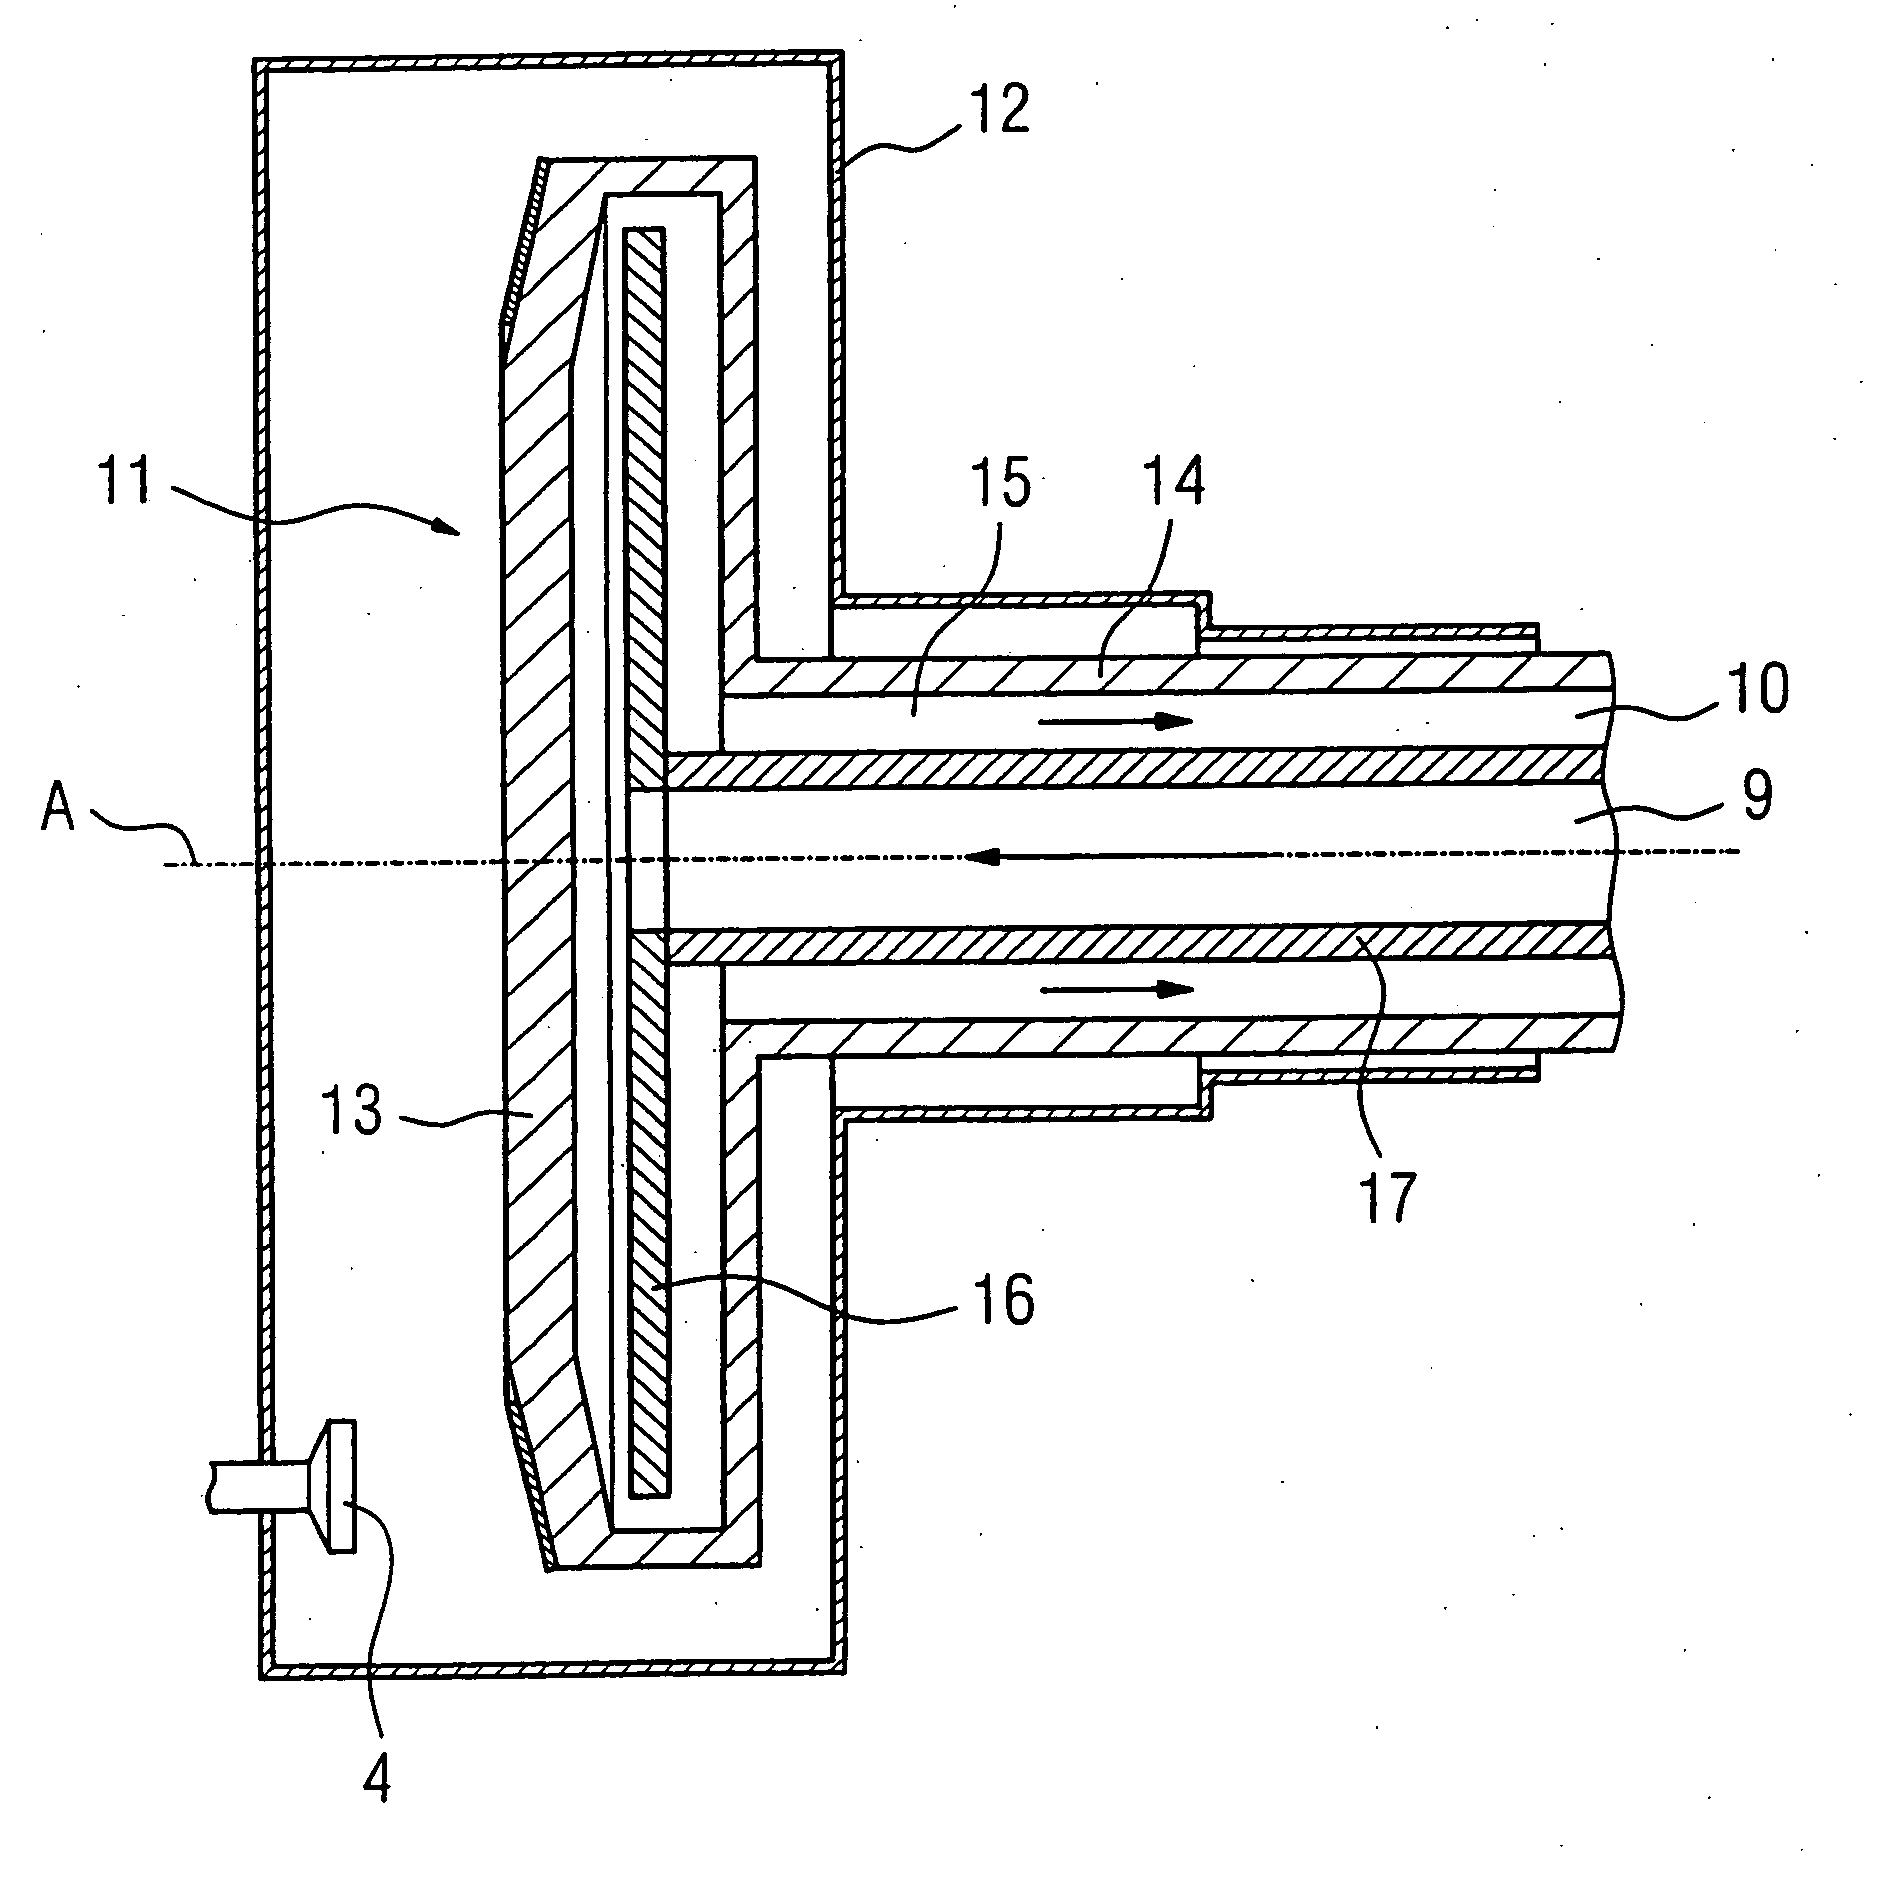 X-ray apparatus with a cooling device through which cooling fluid flows